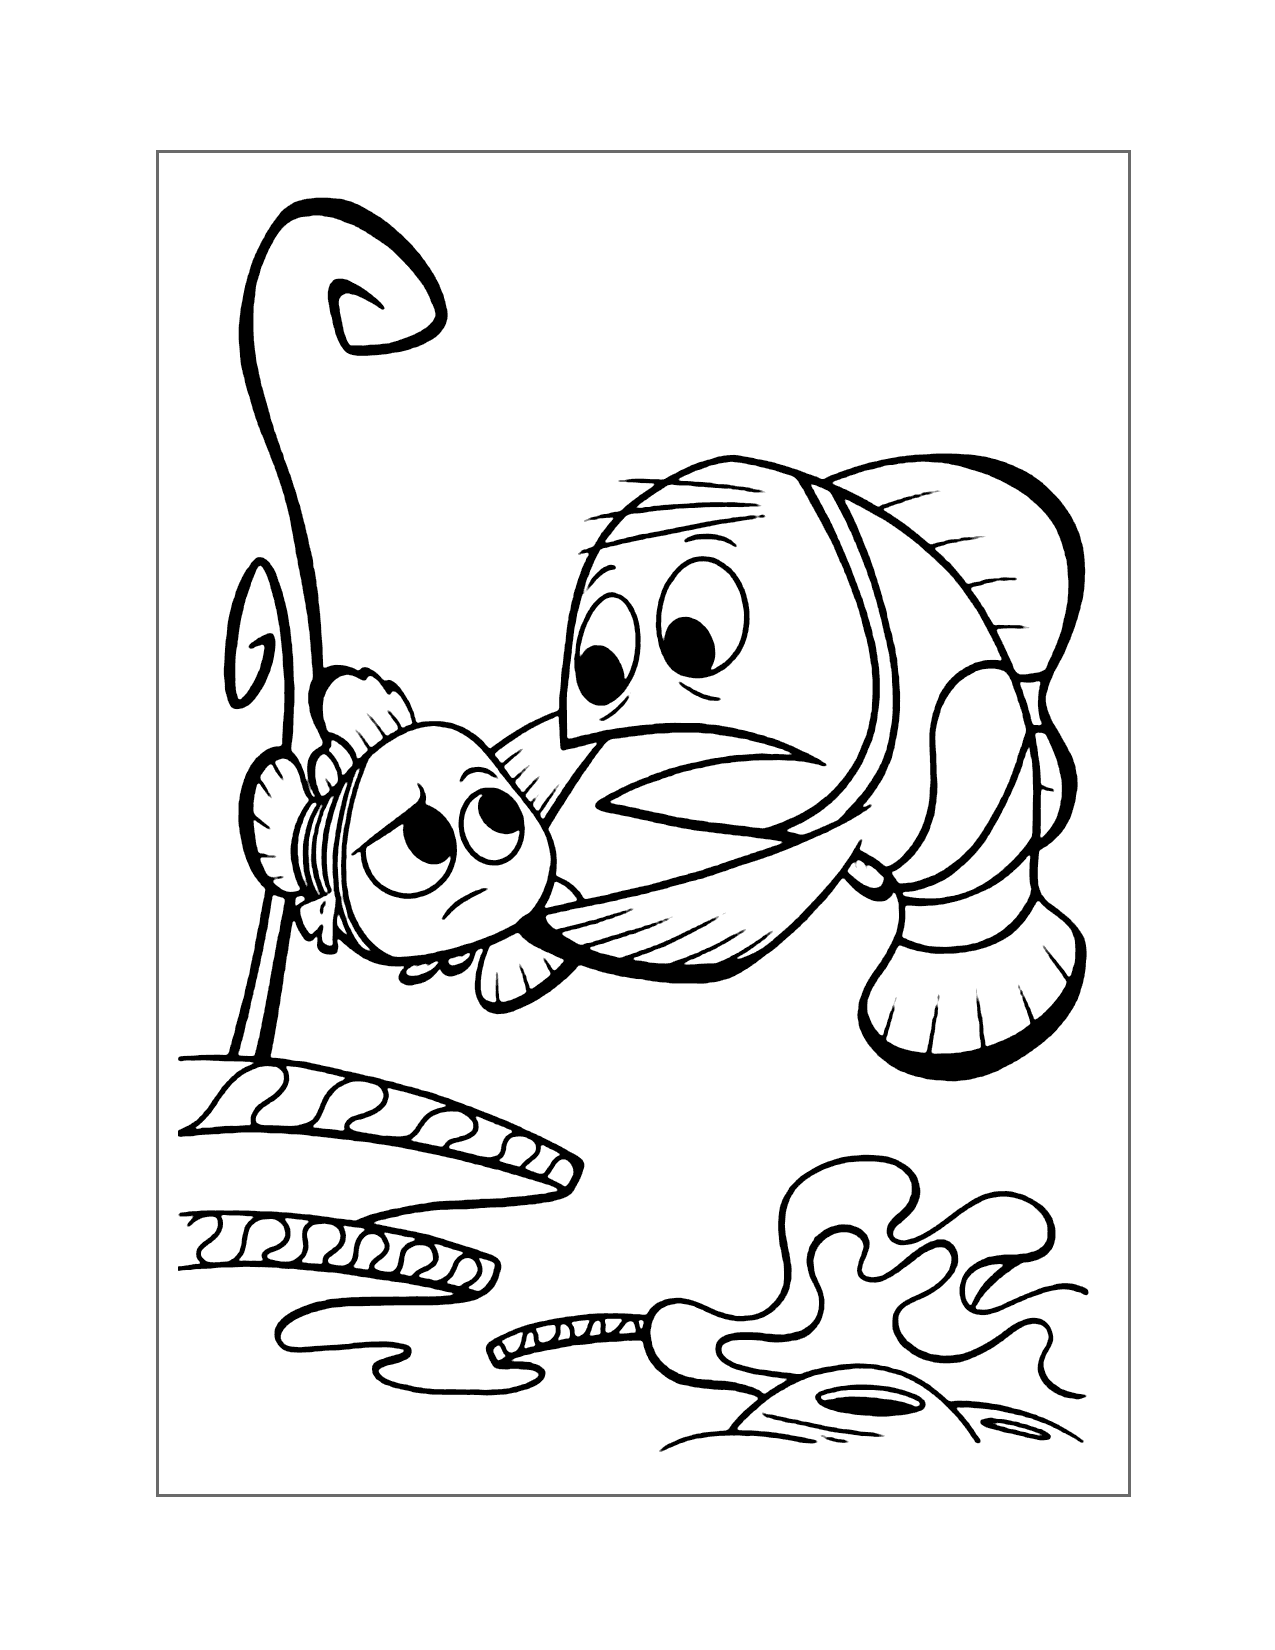 Marlin Worries About Nemo Coloring Page